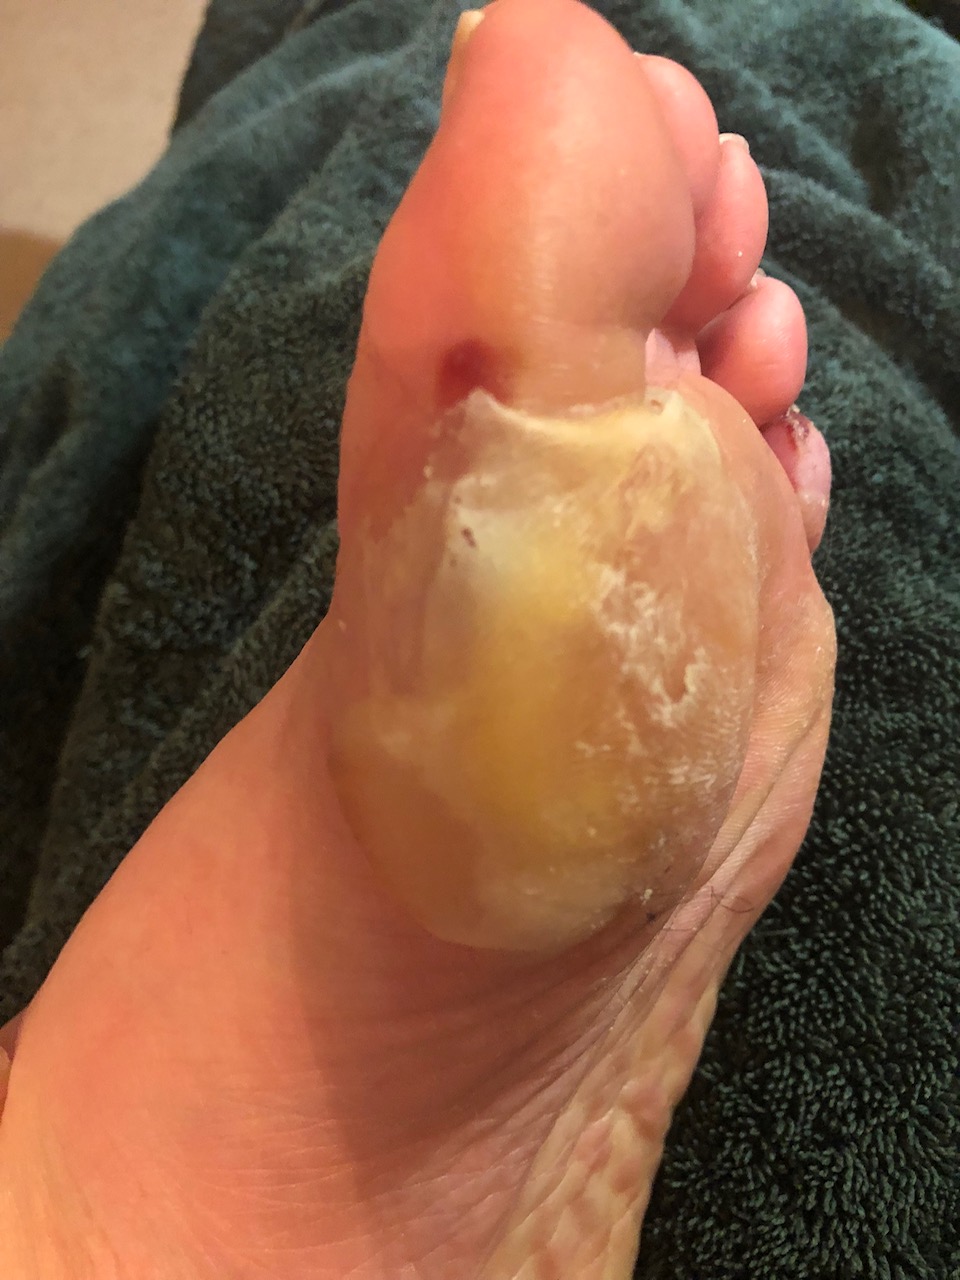 Left foot showing a very large blister across the ball of the foot